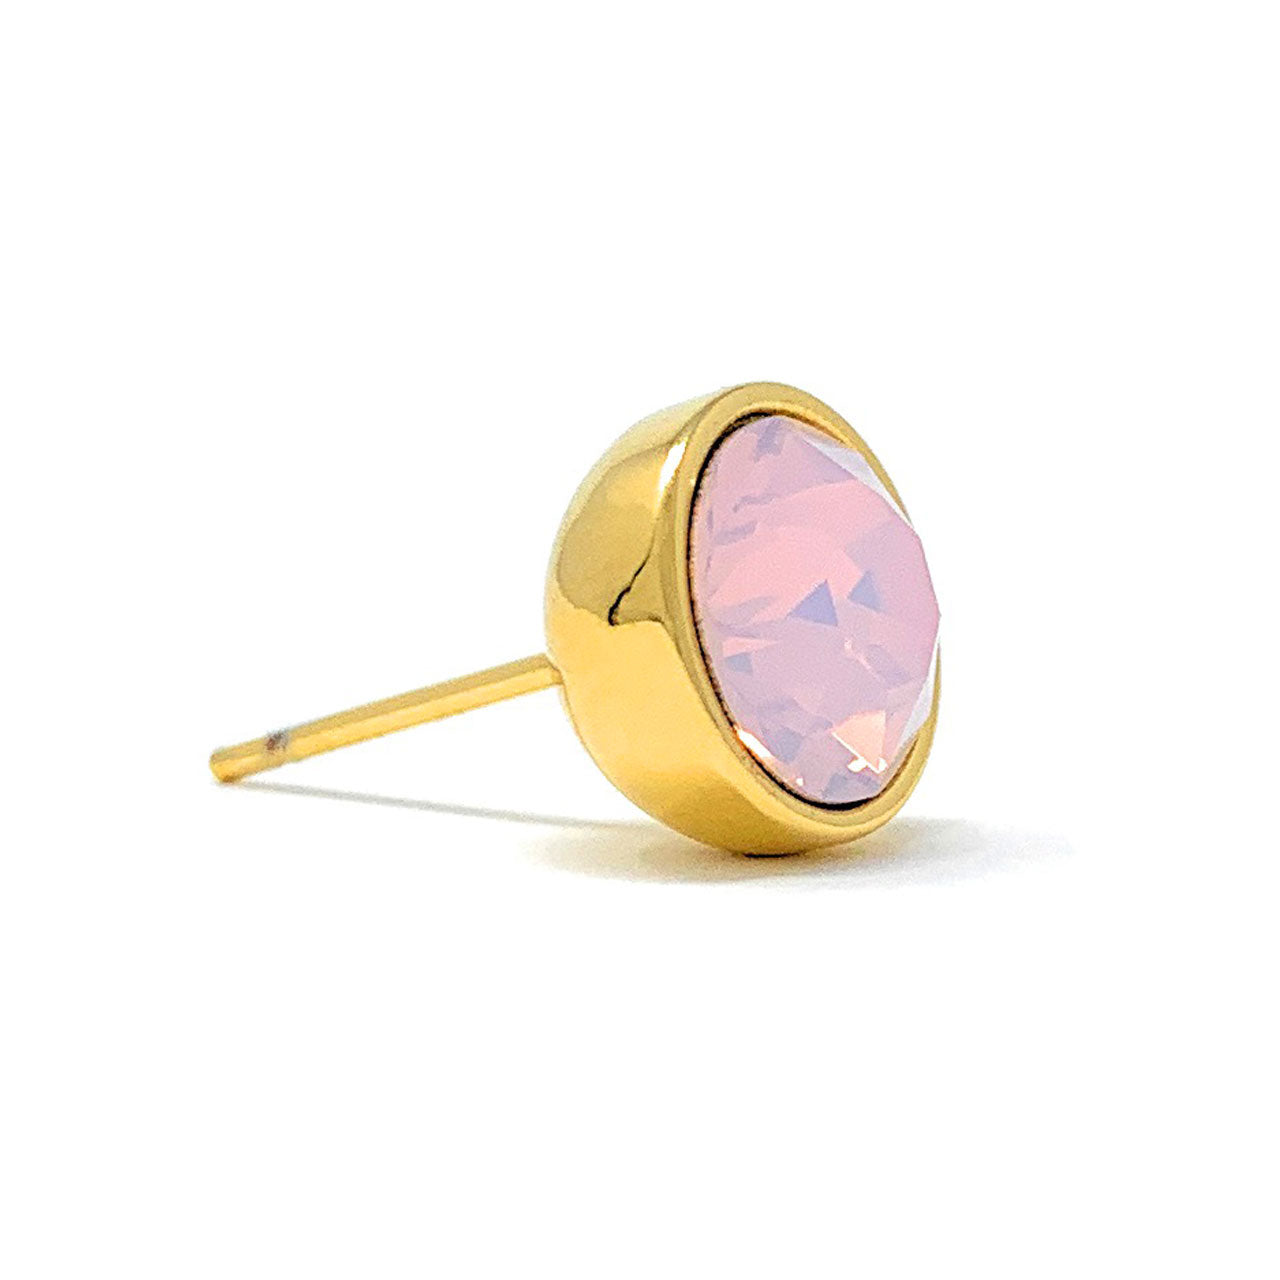 Harley Stud Earrings with Pink Rose Water Round Opals from Swarovski Gold Plated - Ed Heart